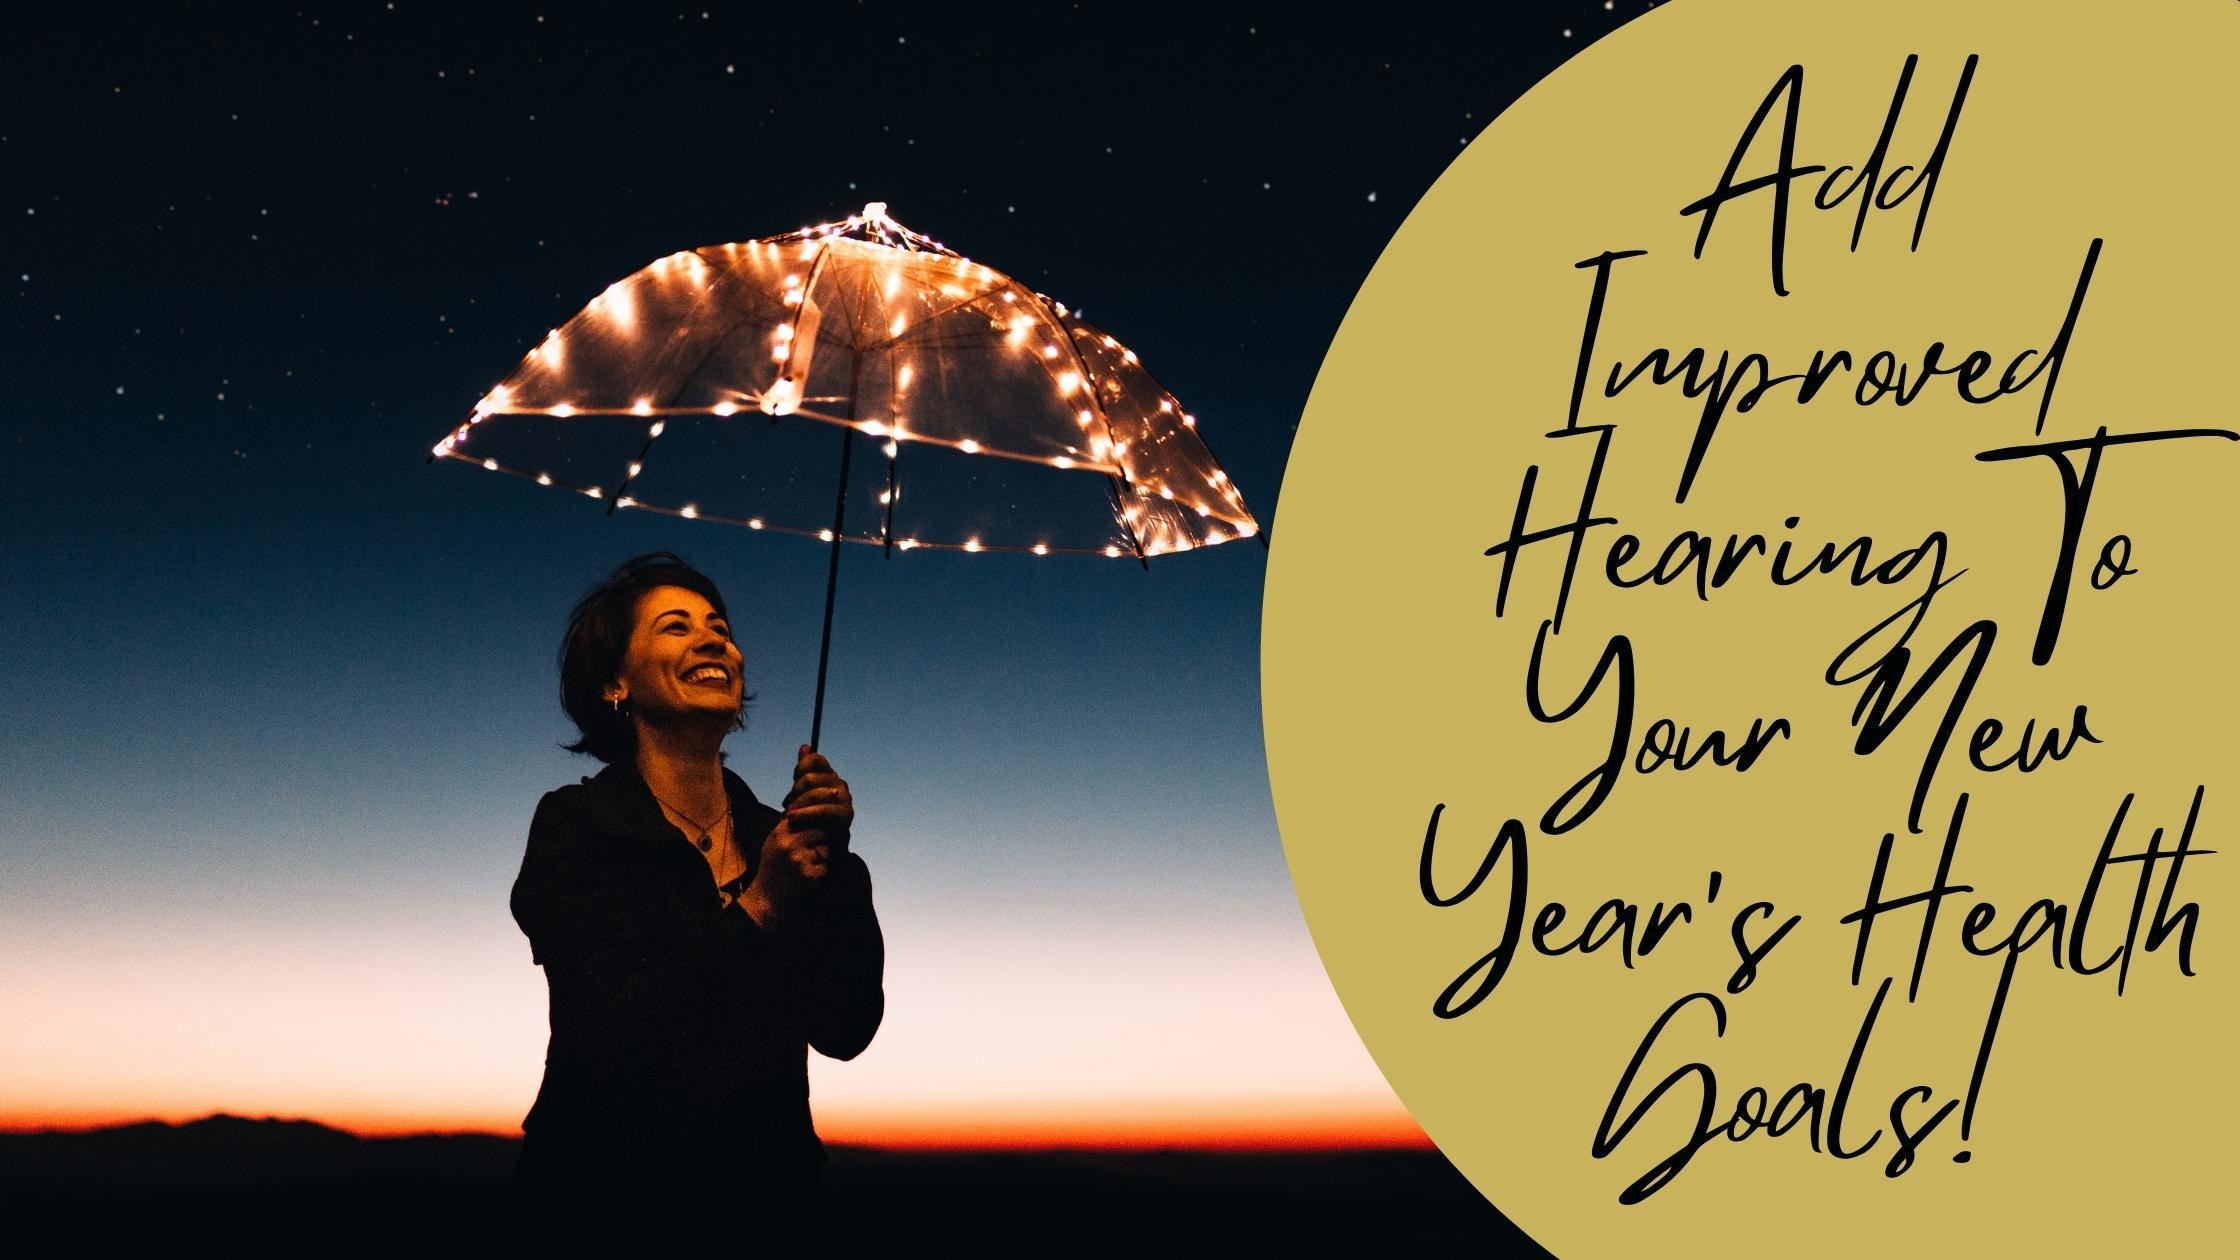 Featured image for “Add Improved Hearing To Your New Year’s Health Goals!”